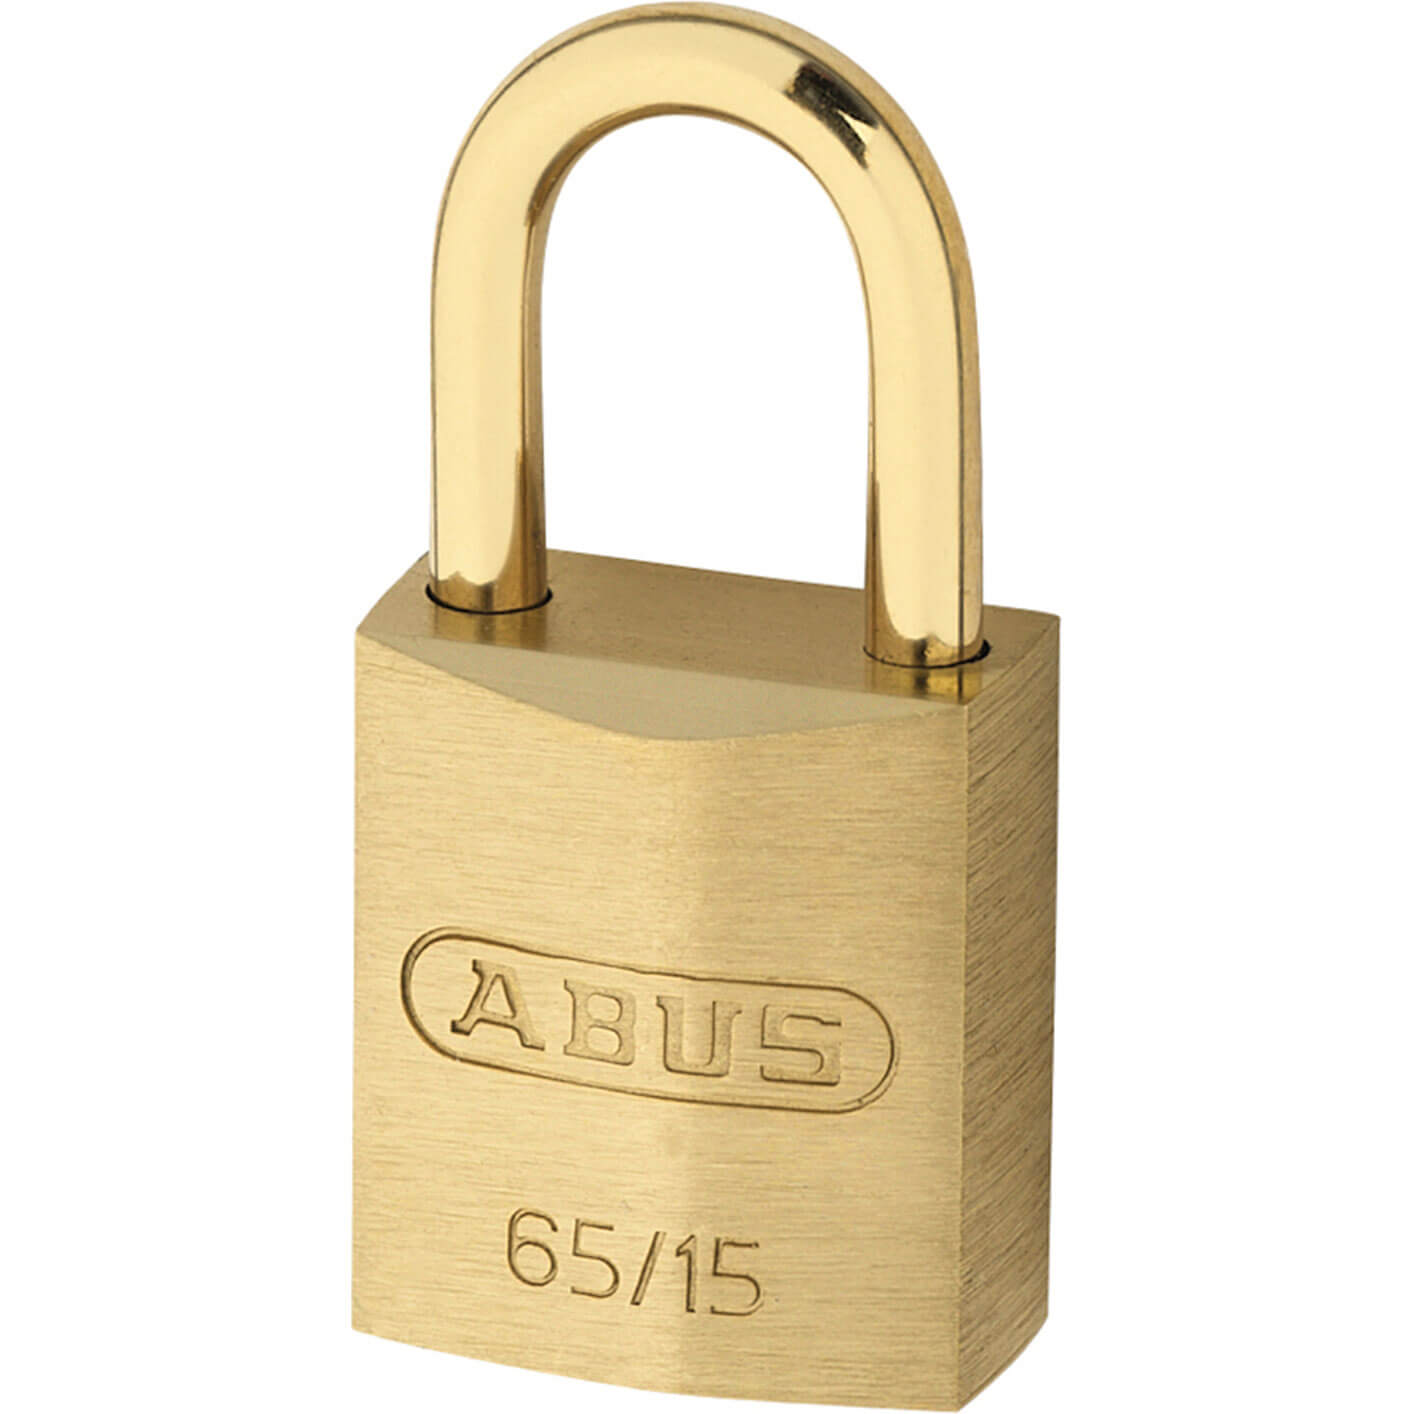 Image of Abus 15mm 65 Series Compact Brass Padlock With Brass Shackle Keyed Alike To Suite 151